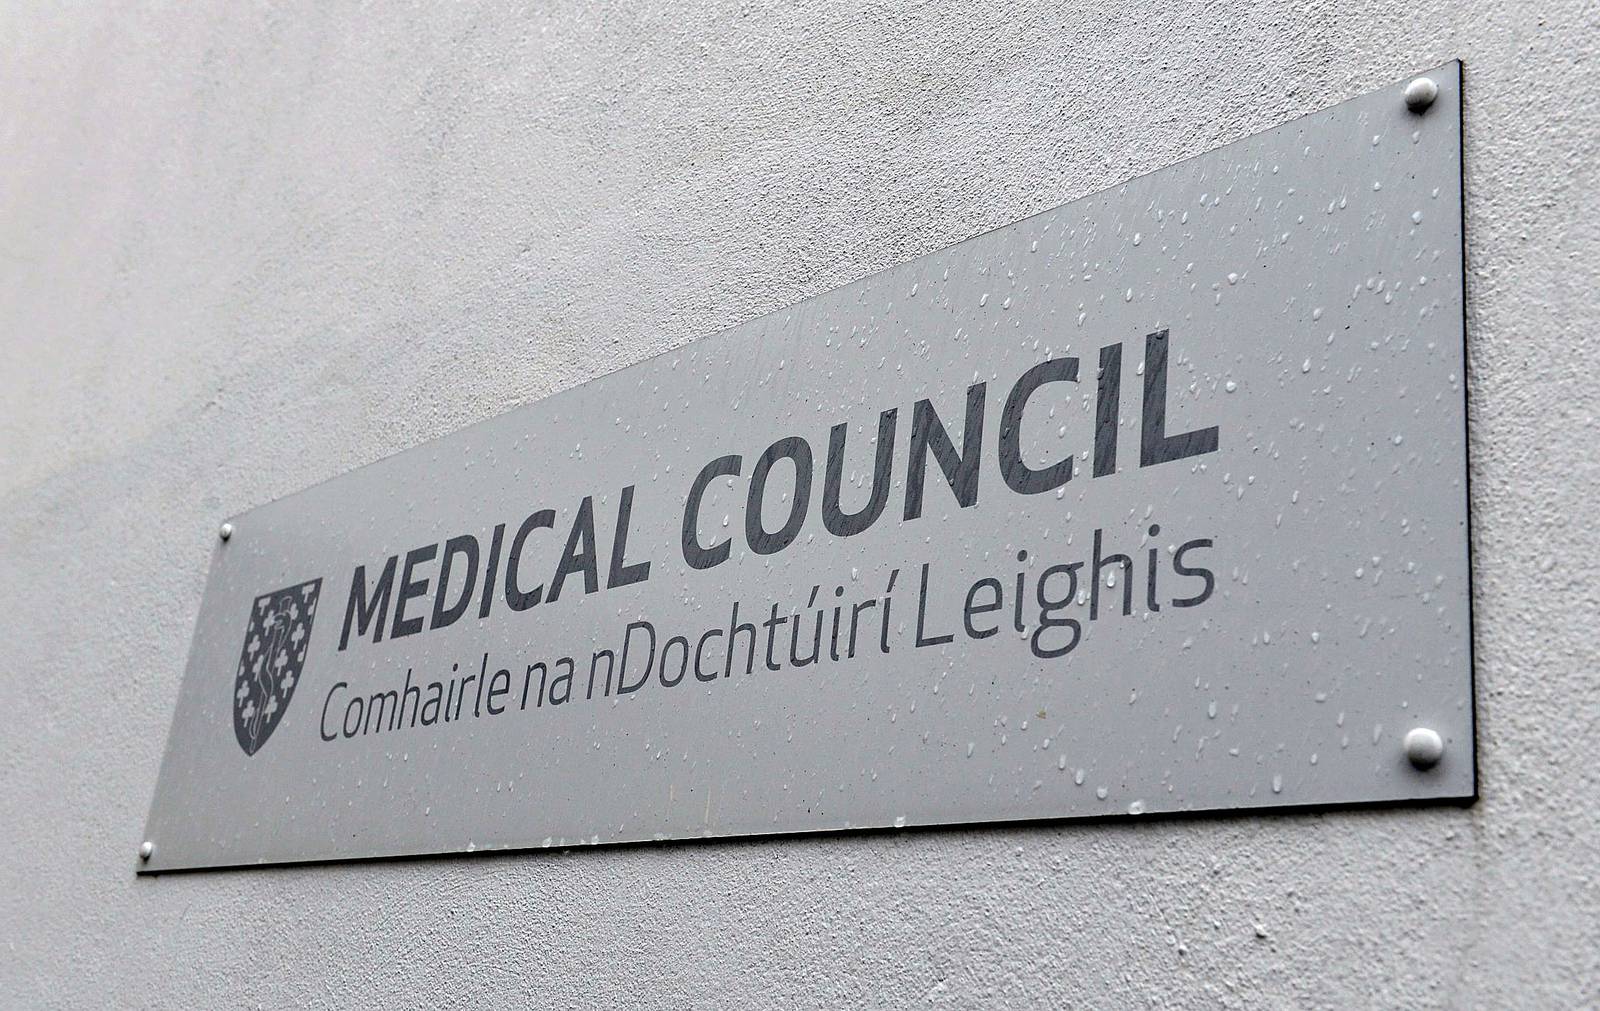 19/03/2013 - Archive - stock - General View - GV  -  Sign at Medical Council Office  Kingram House, Kingram Place,  Dublin 2. 
Photo: David Sleator/THE IRISH TIMES